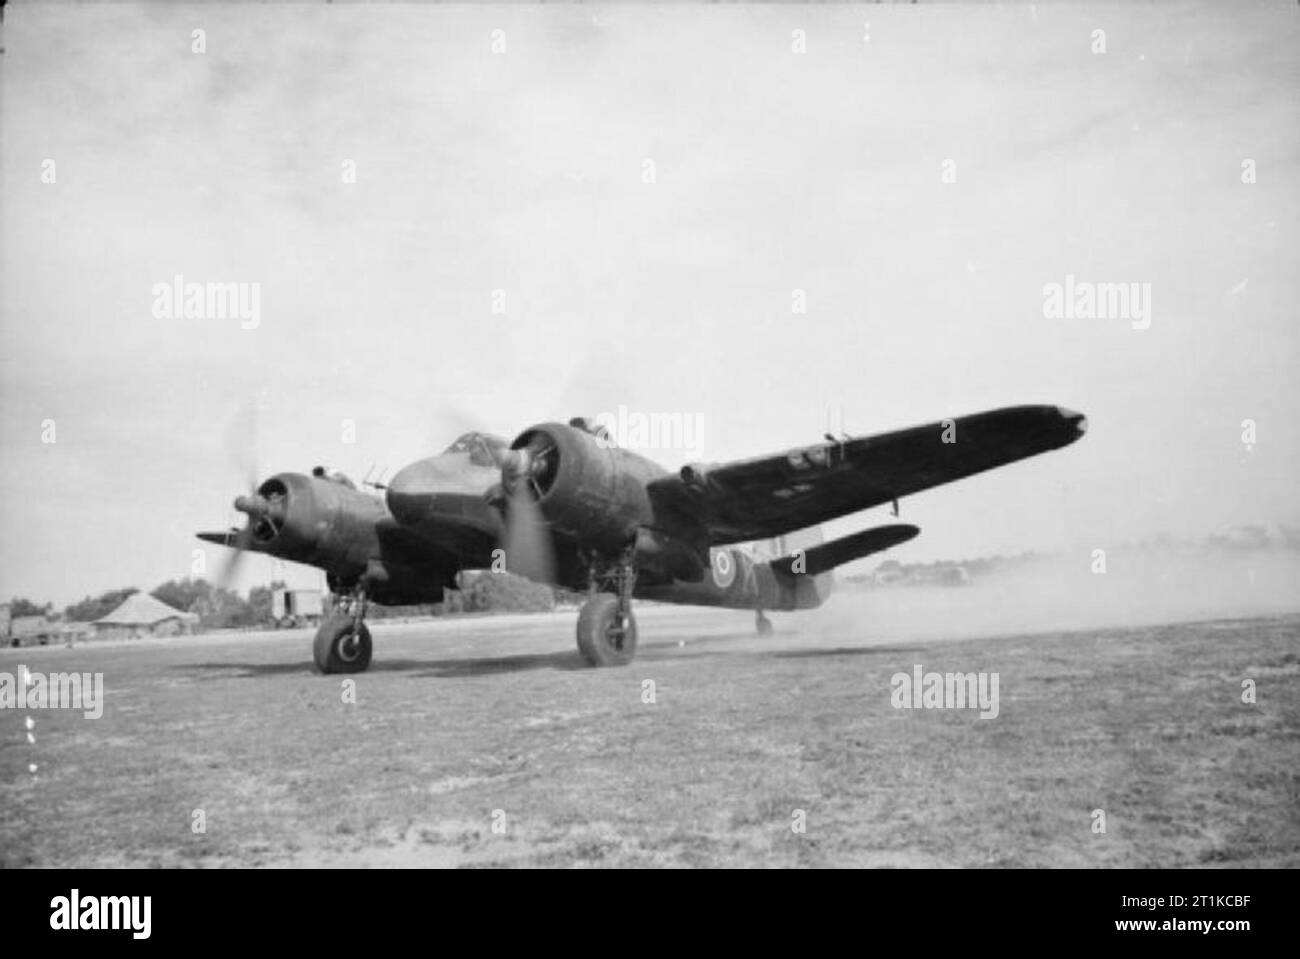 Aircraft of the Royal Air Force 1939-1945- Bristol Type 156 Beaufighter. Beaufighter Mark VIF, V8380 'K', of No. 89 Squadron RAF, running up its engines at Castel Benito, Libya. This aircraft is equipped with AI Mark IV air-interception radar Stock Photo